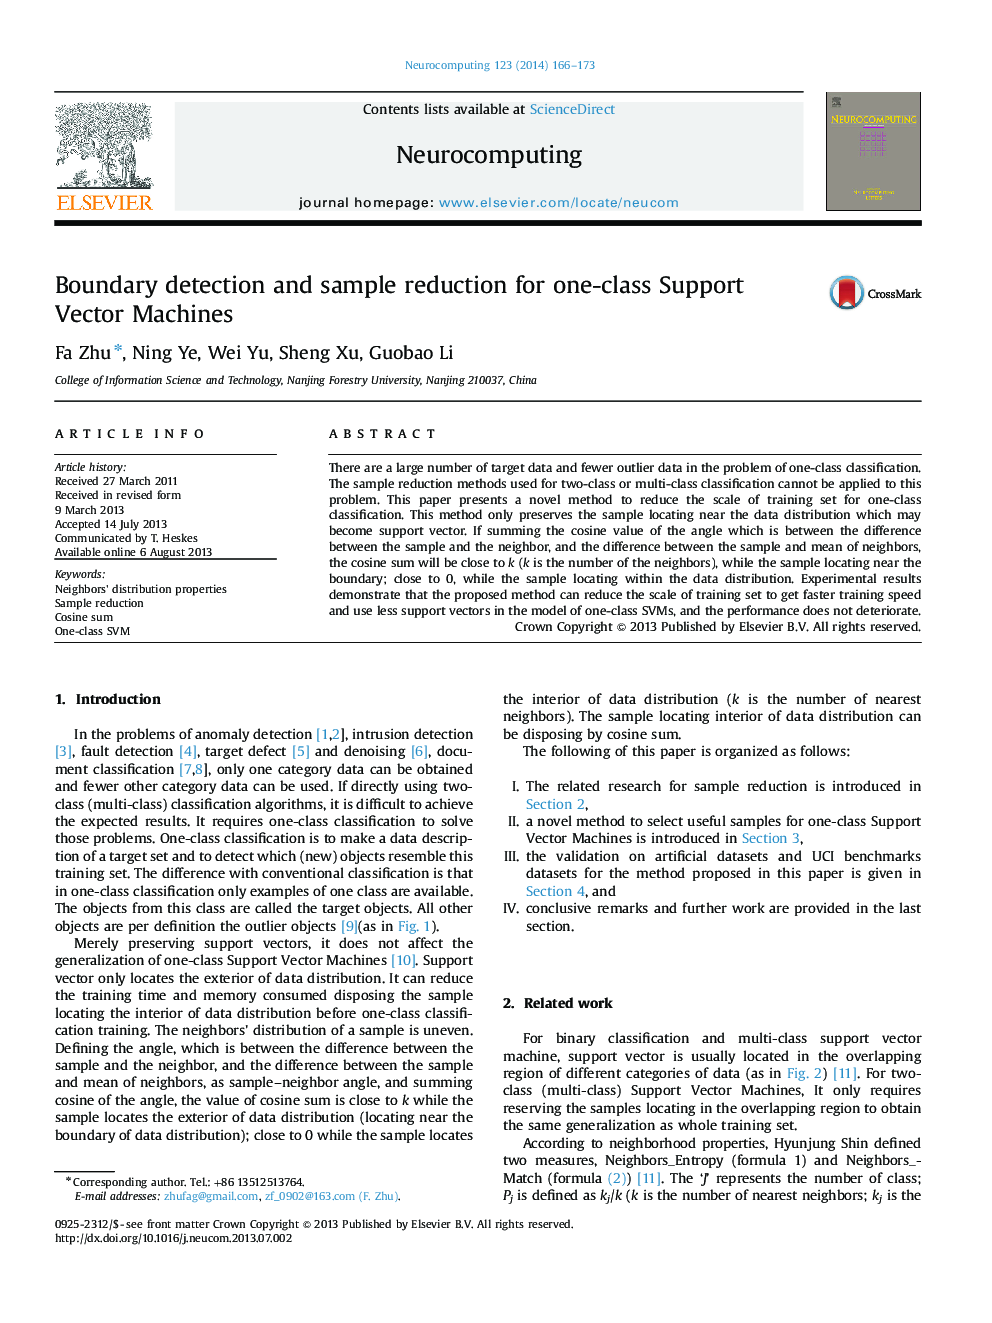 Boundary detection and sample reduction for one-class Support Vector Machines